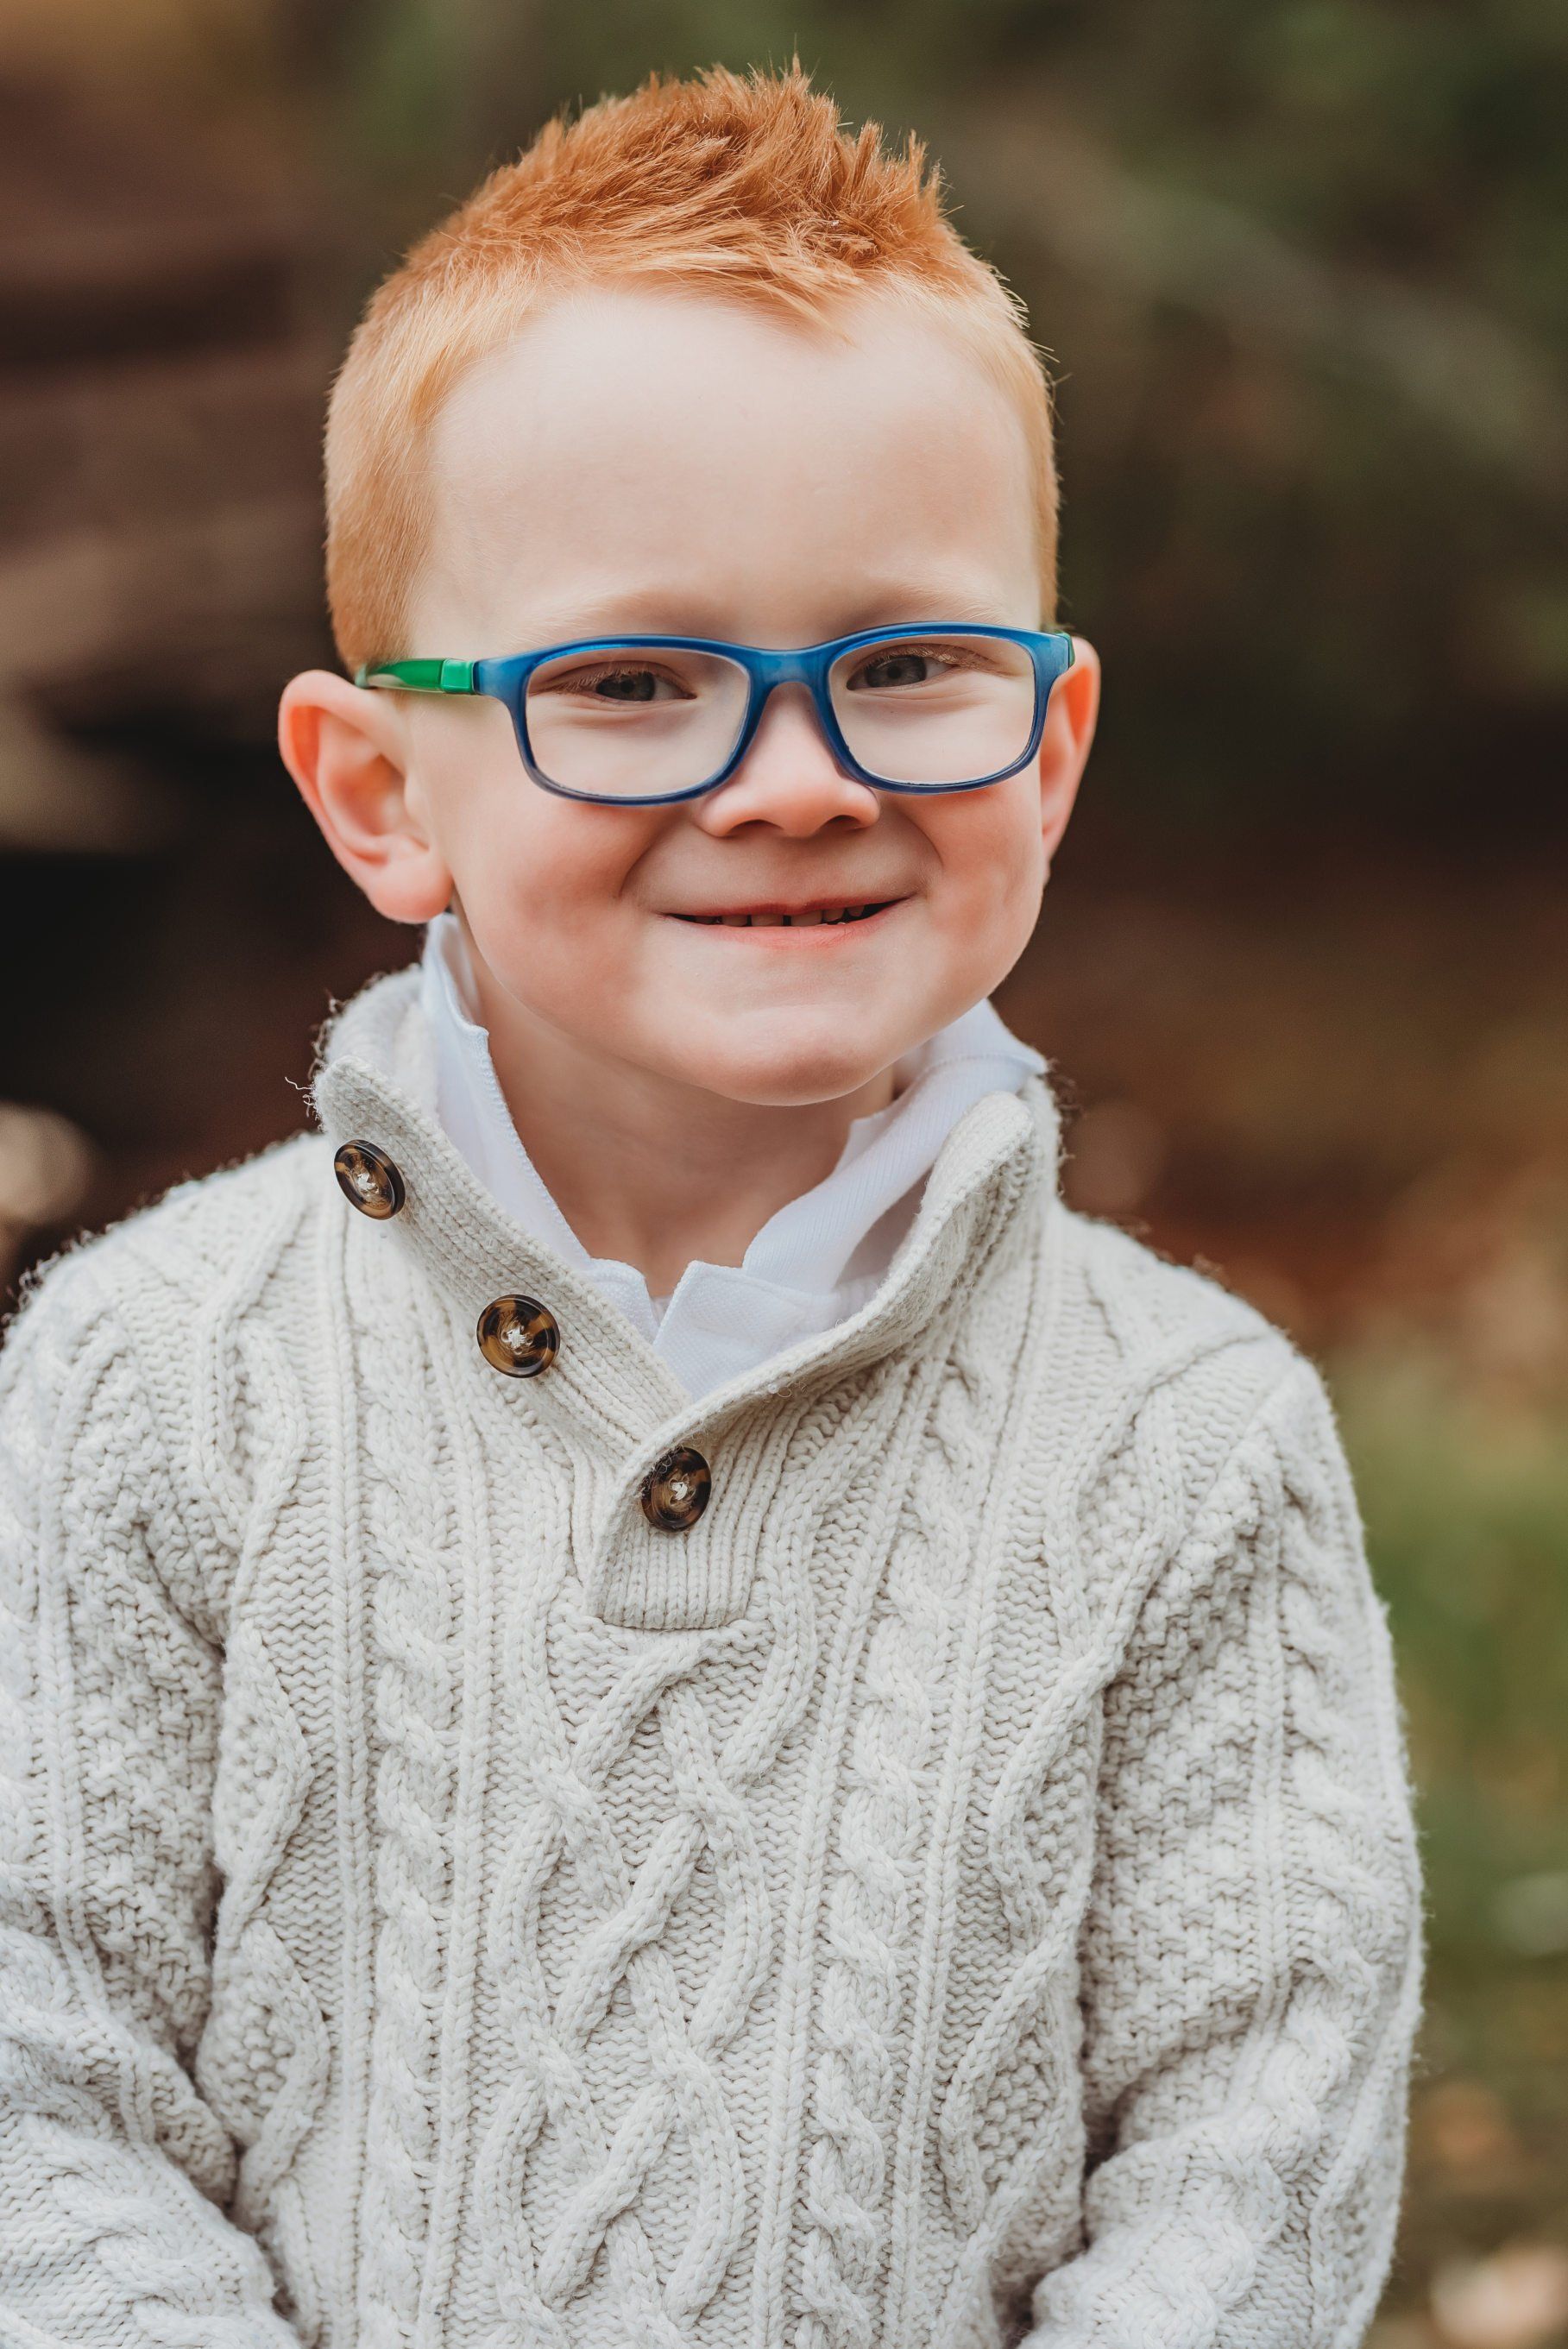 Photo of a small boy smiling while standing outdoors for family photography